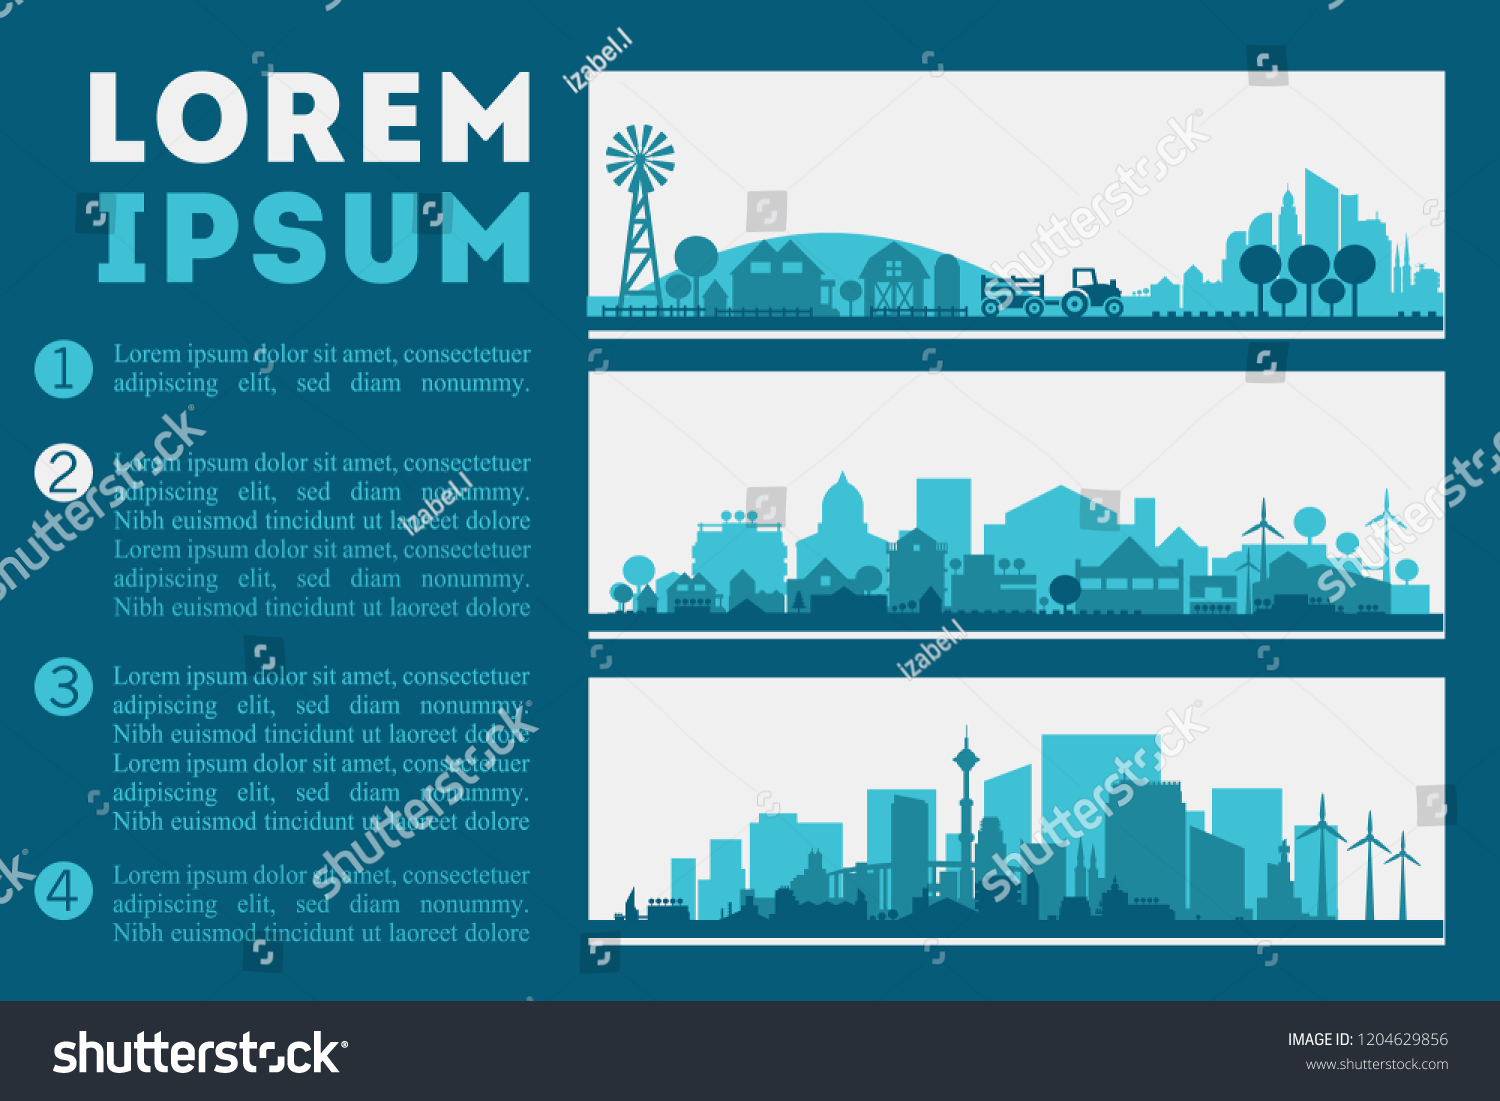 City Skyline Illustration, City and Town Concept Banners #1204629856